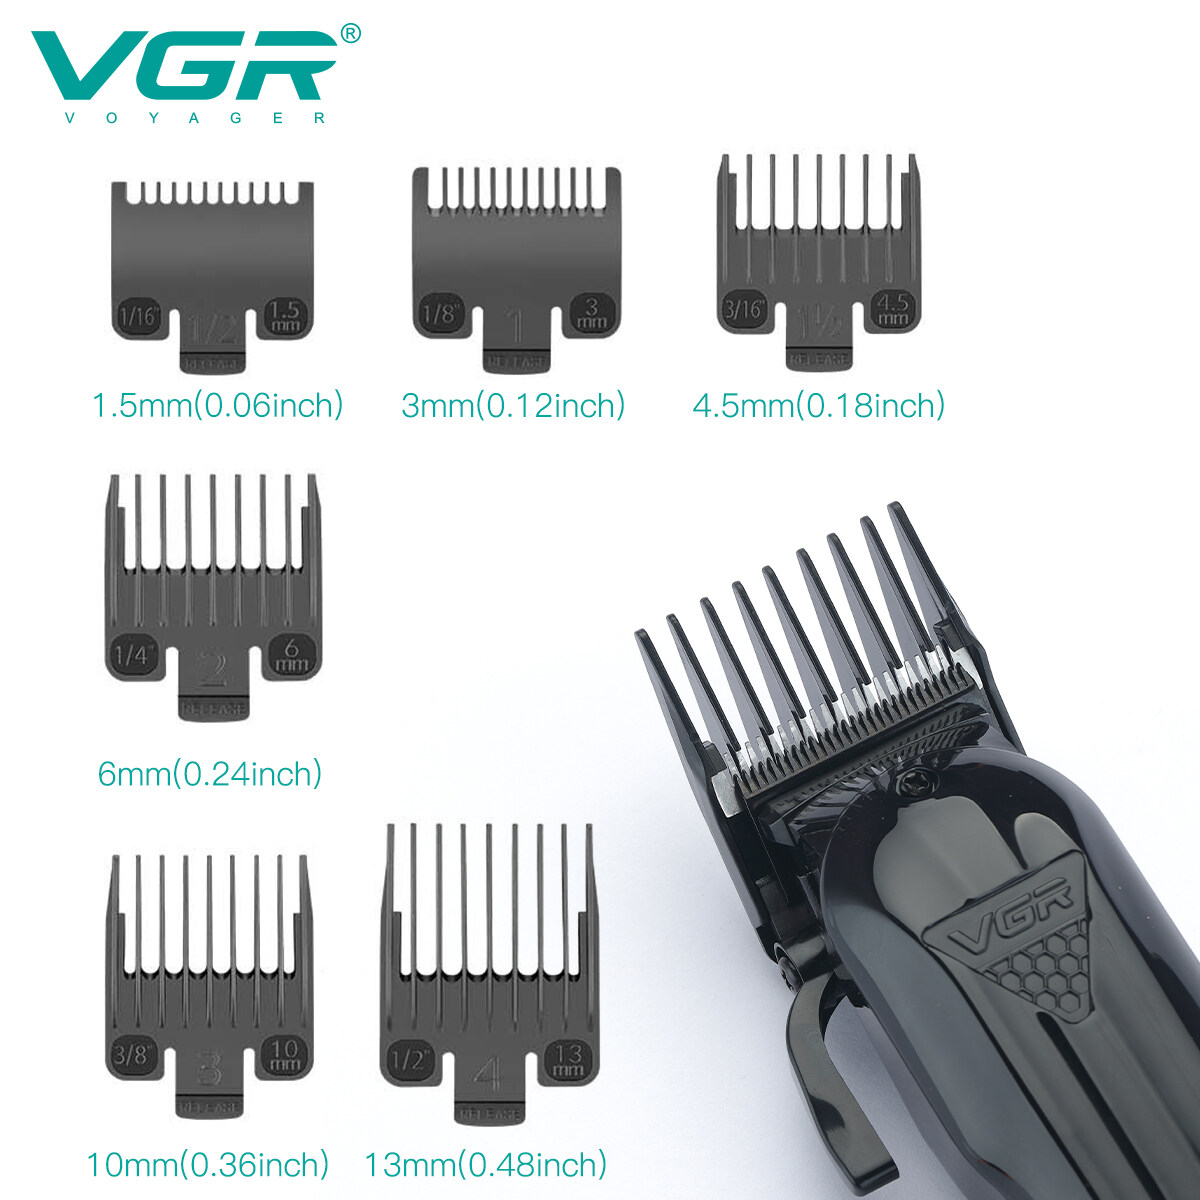 hair trimmer factory, hair trimmer made in china, hair trimmer oem, Adjustable Cordless Trimmer suppliers, wholesale Rechargeable Hair Clipper